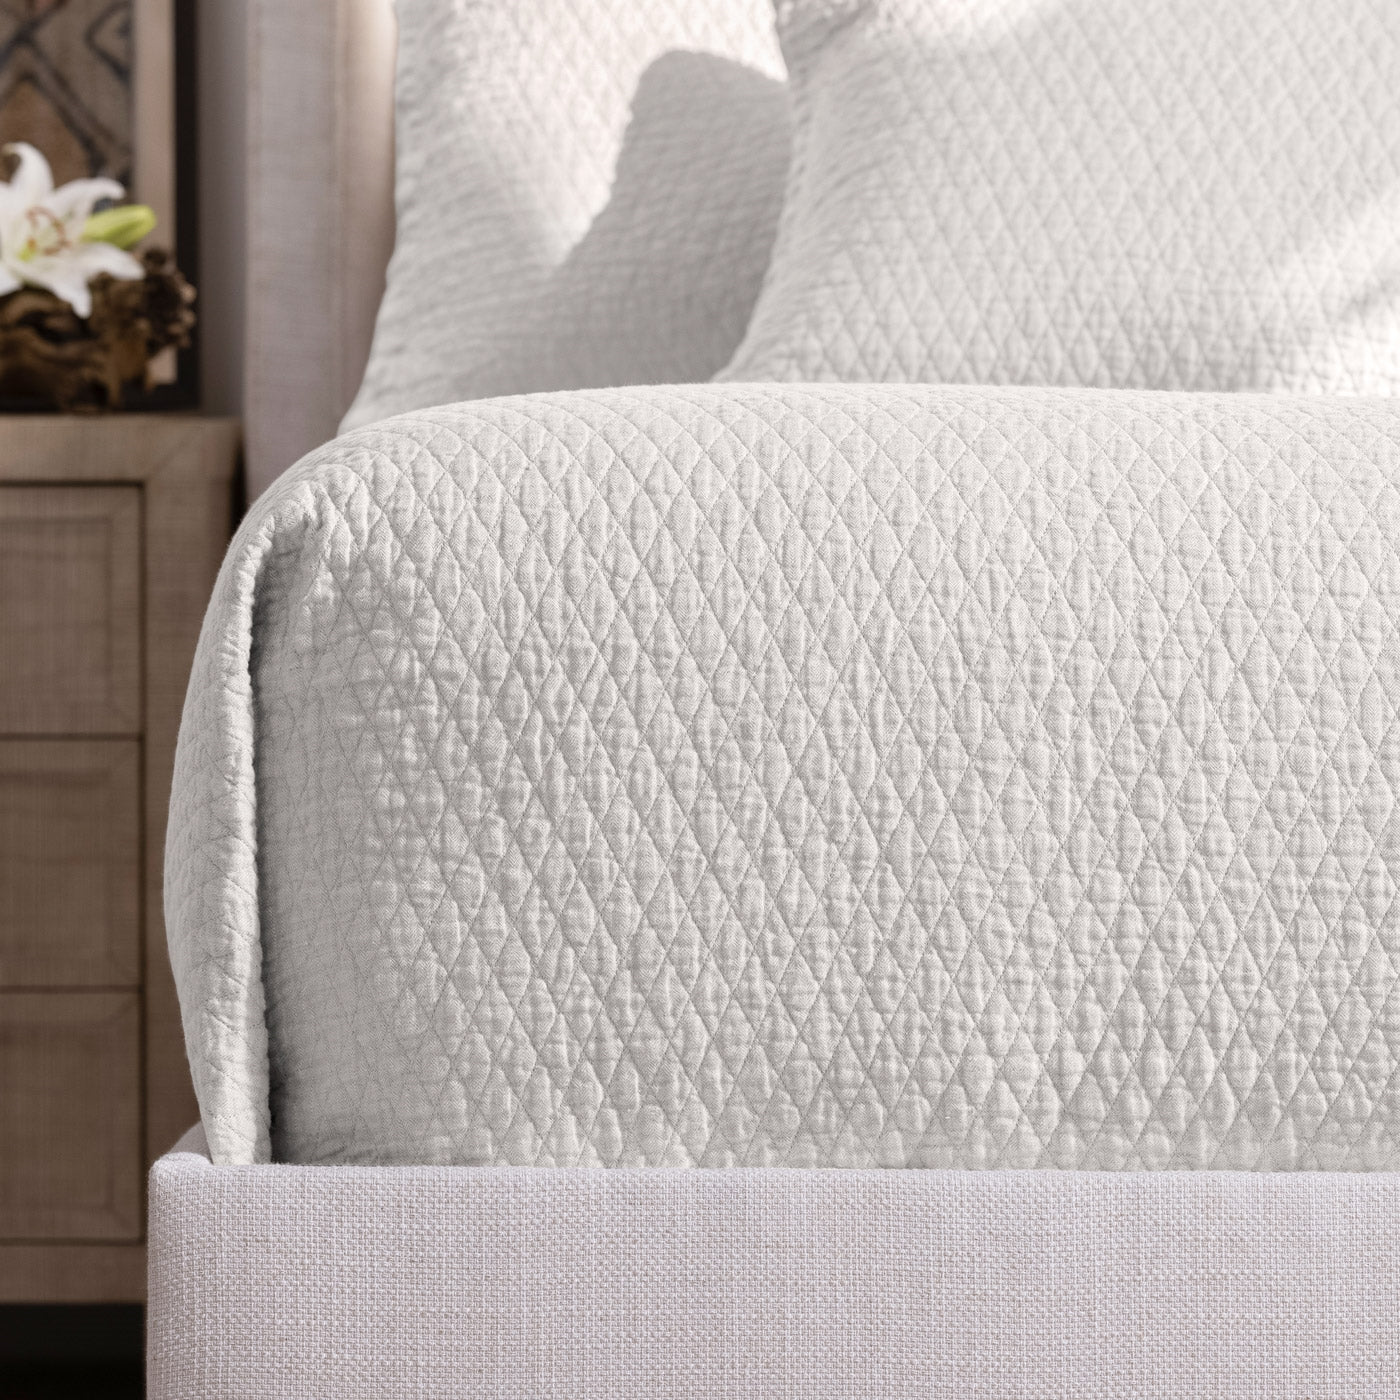 Dawn White Coverlet by Lili Alessandra | Fig Linens and Home